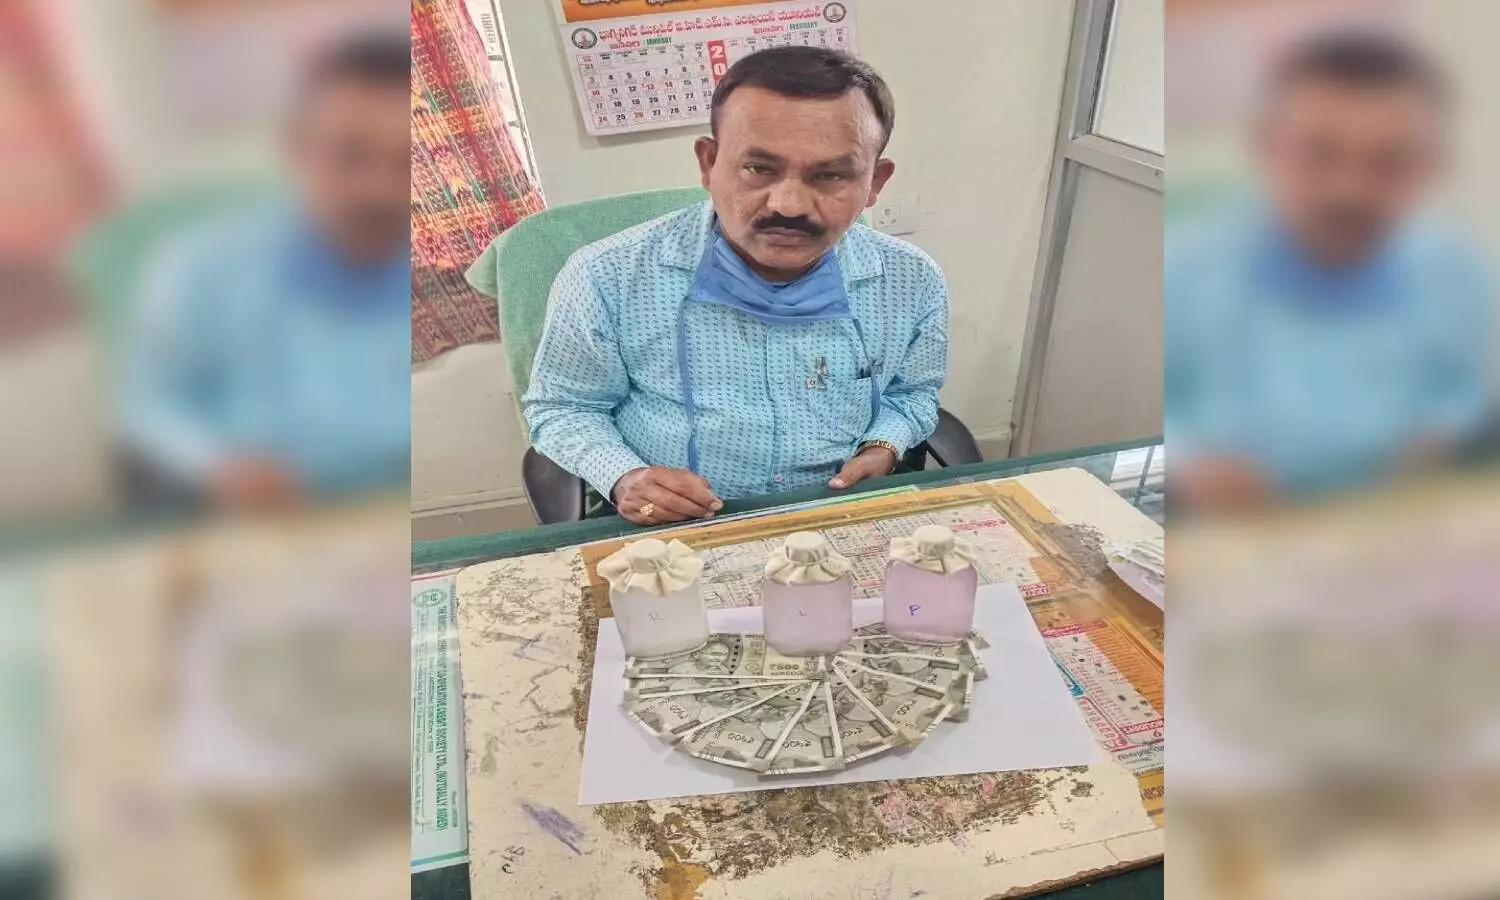 GHMC Superintendent demands bribe as a reward for sanctioning funeral money, trapped